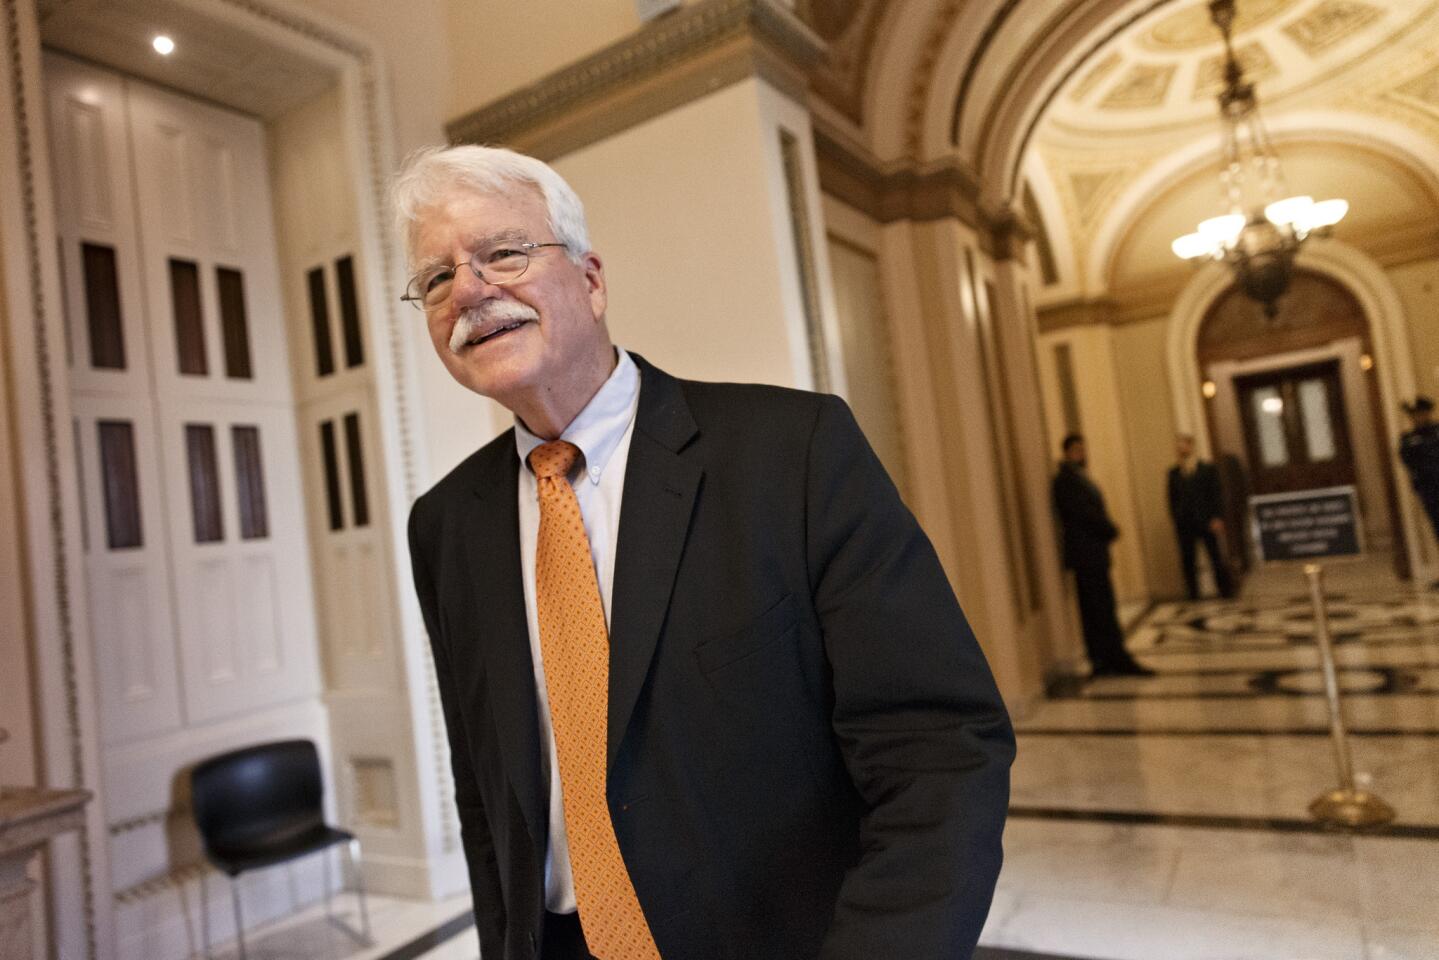 Rep. George Miller (D-Martinez), dean of the California congressional delegation, announced Jan. 13 that he will retire from Congress, ending a 40-year tenure. Elected in 1974, Miller has served as chairman of the Committee on Natural Resources and the Committee on Education and Labor.